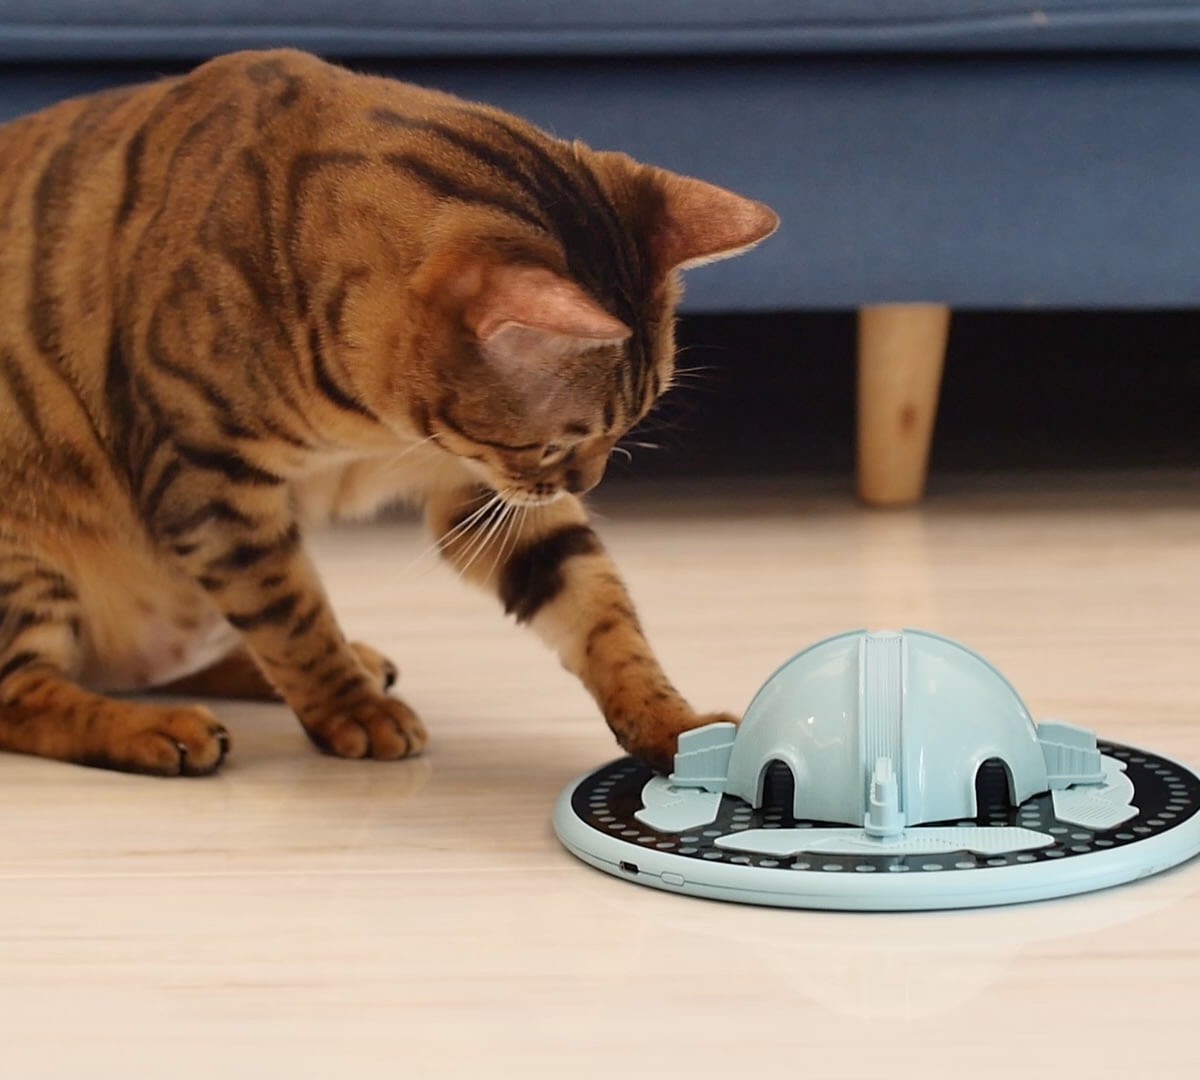 TrickyPaw cat hunting toy is a smart companion to entertain your feline friend